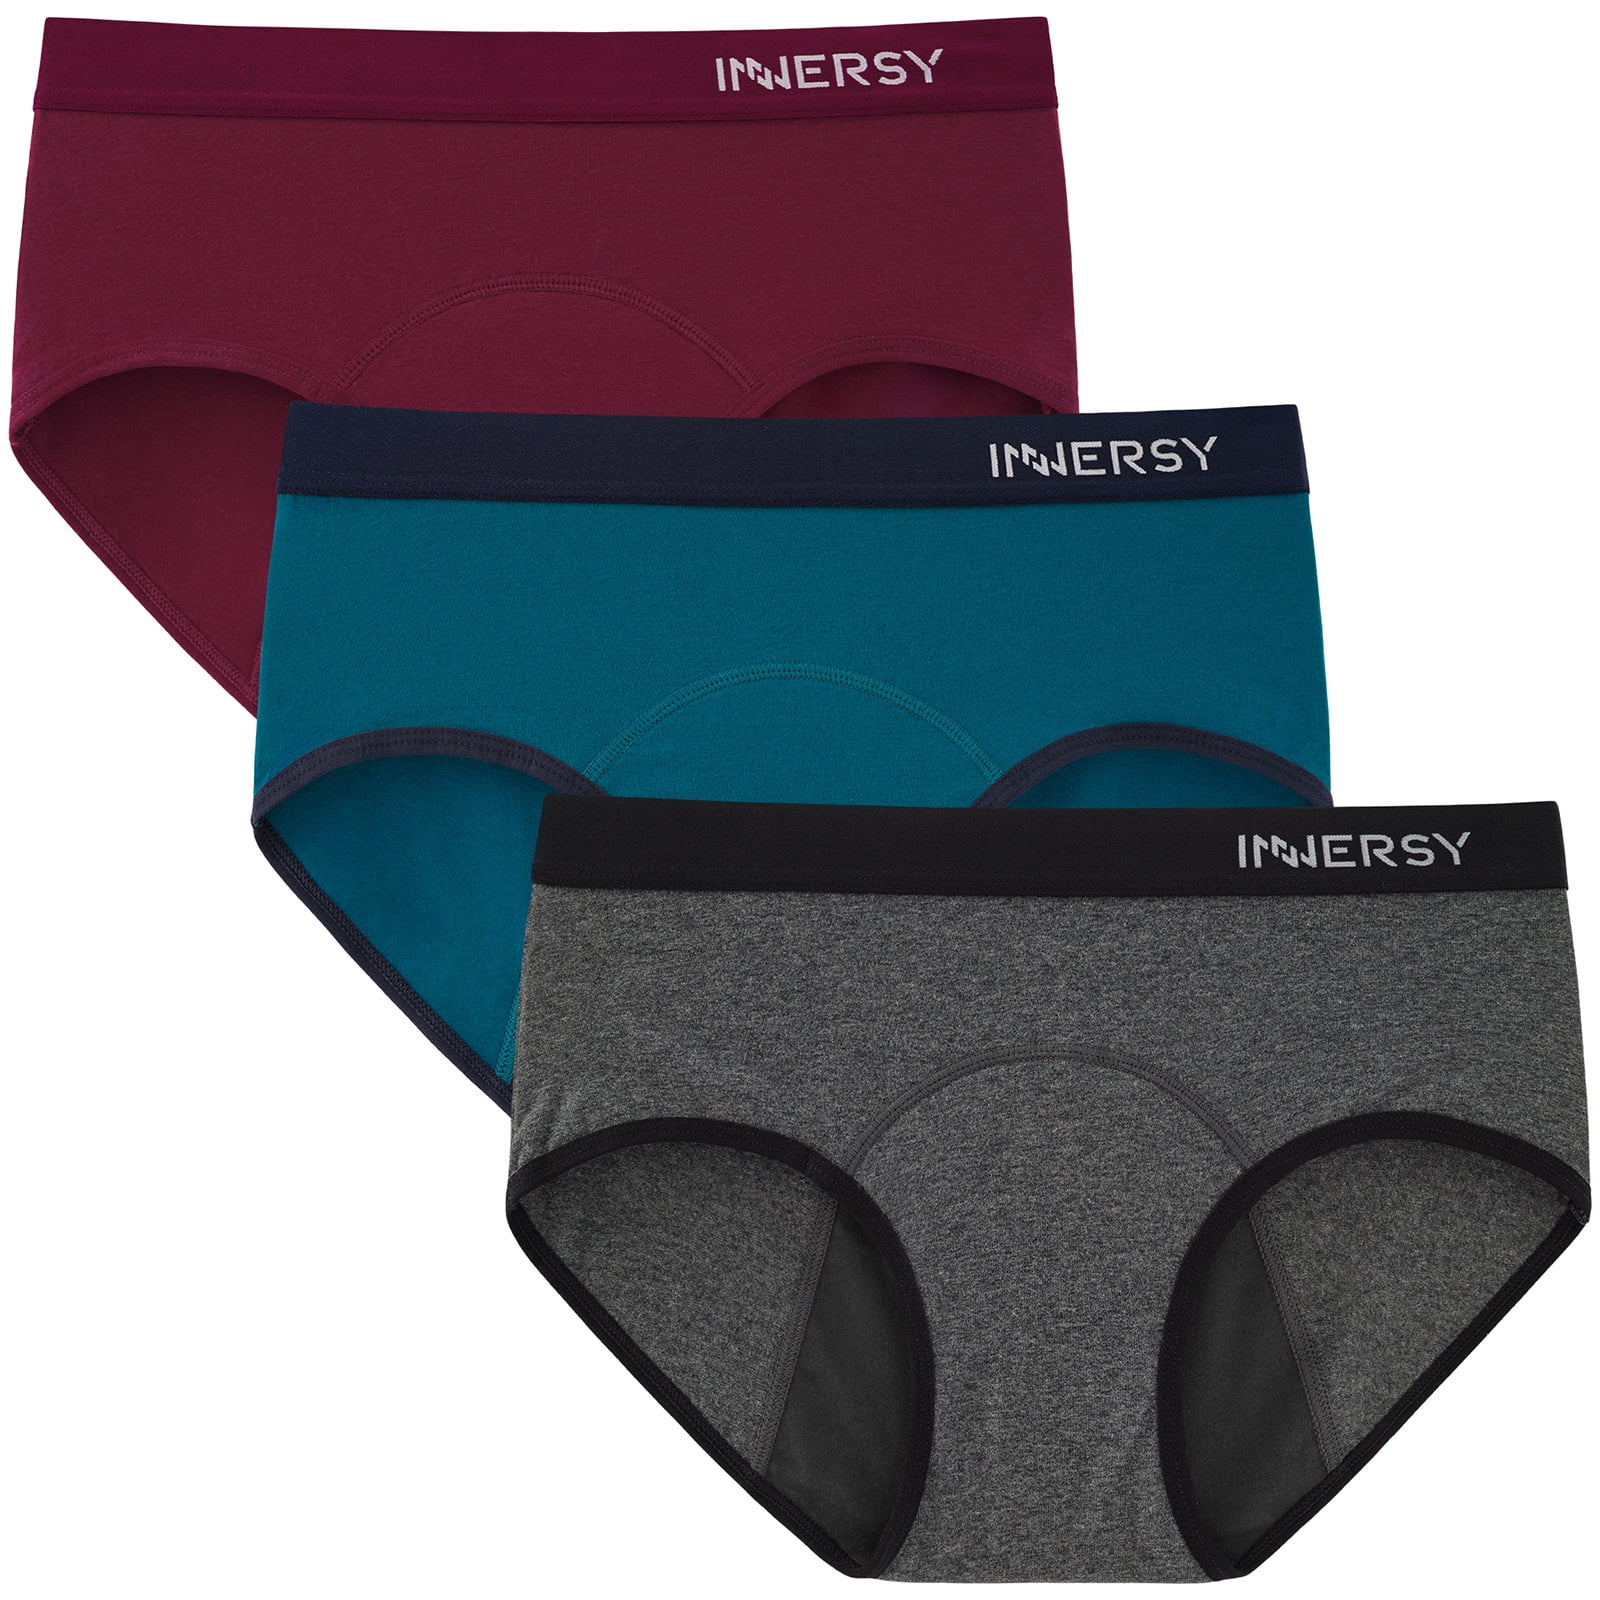 INNERSY Period Panties For Women Cotton Mid/Low Rise Menstrual Underwear 3  Pack (S, Gray/Claret/Lake Blue) 